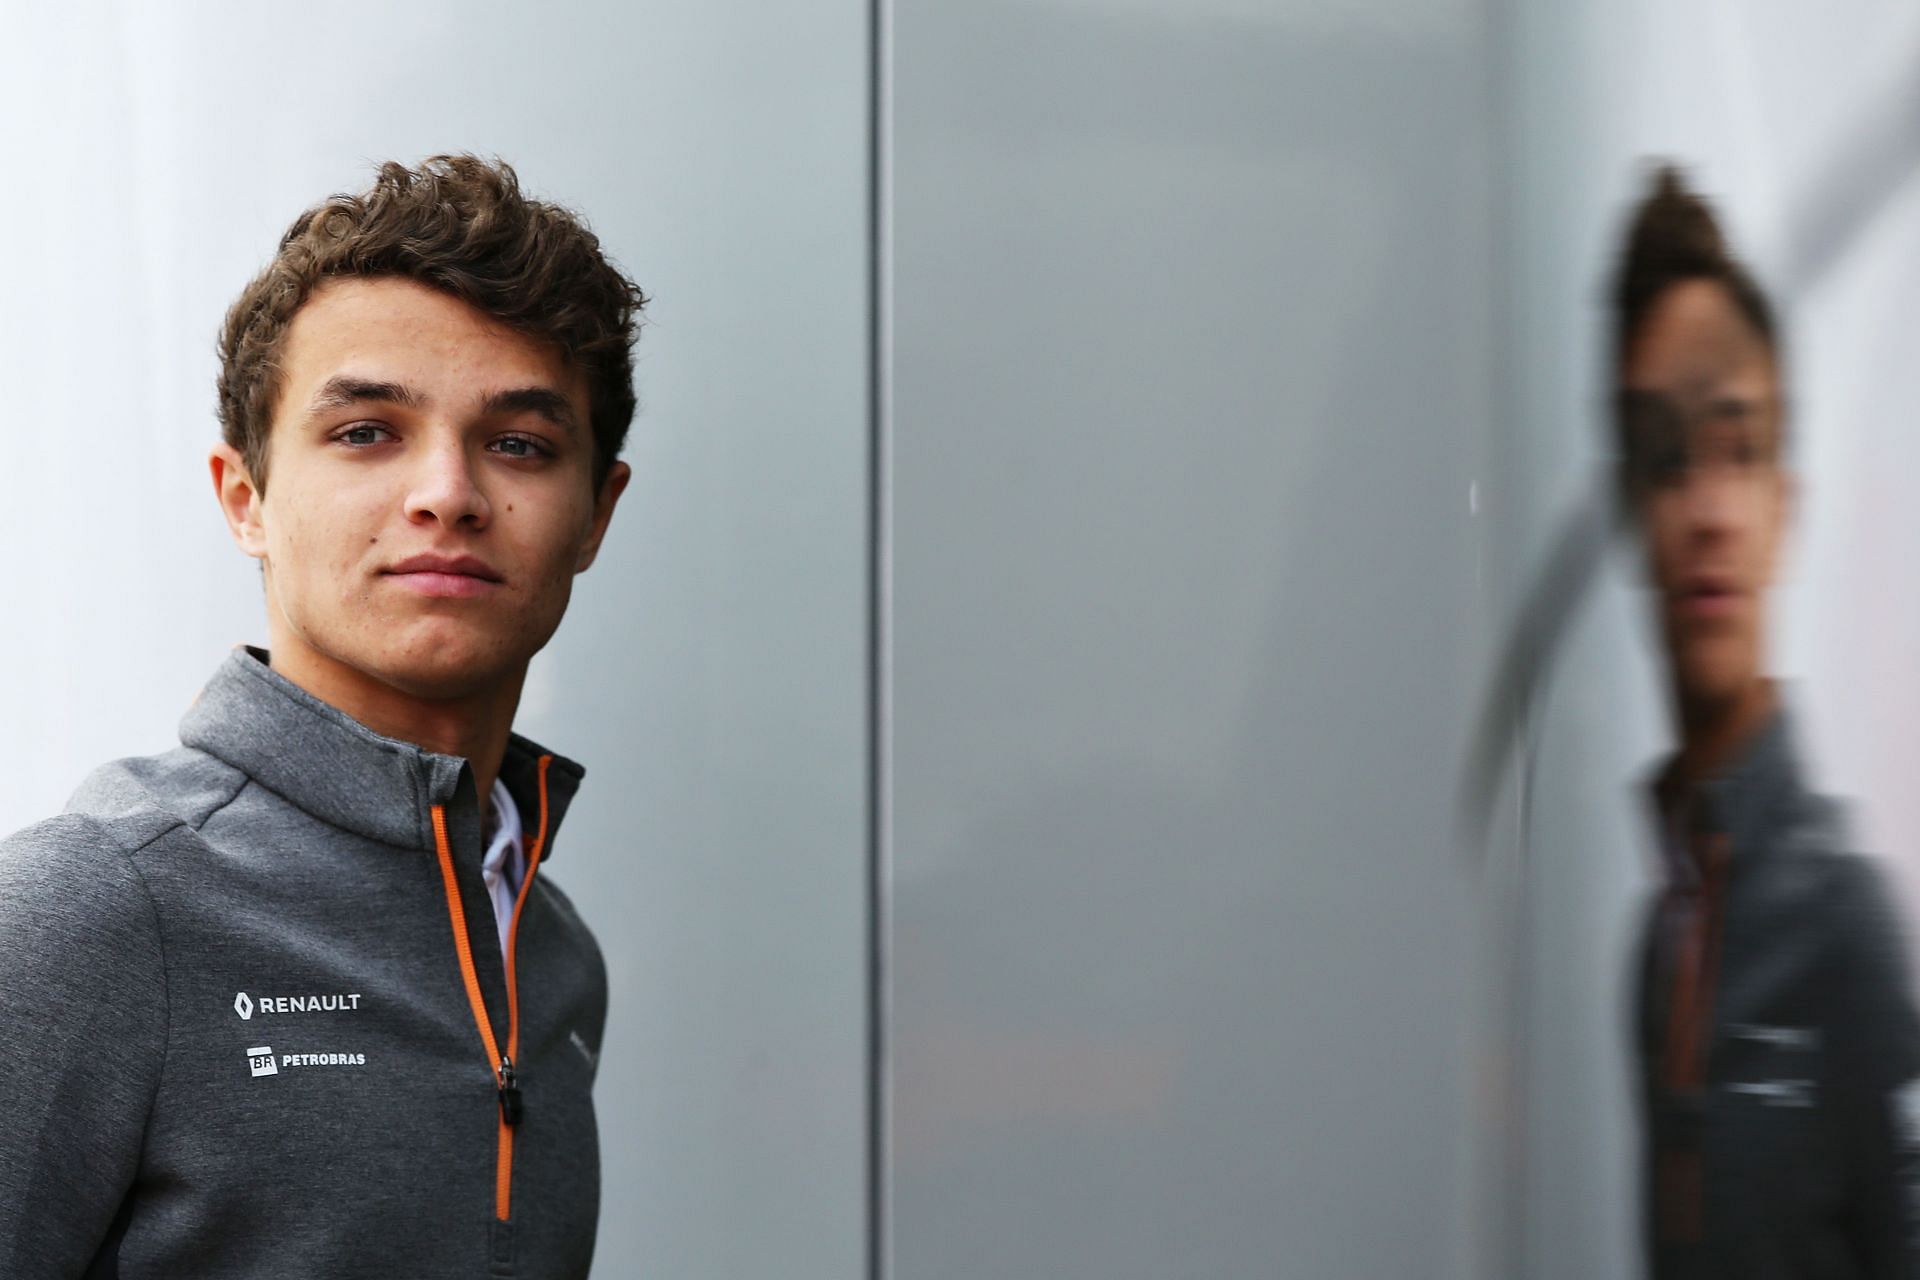 Lando Norris was one of the few drivers who knelt in solidarity with the black community